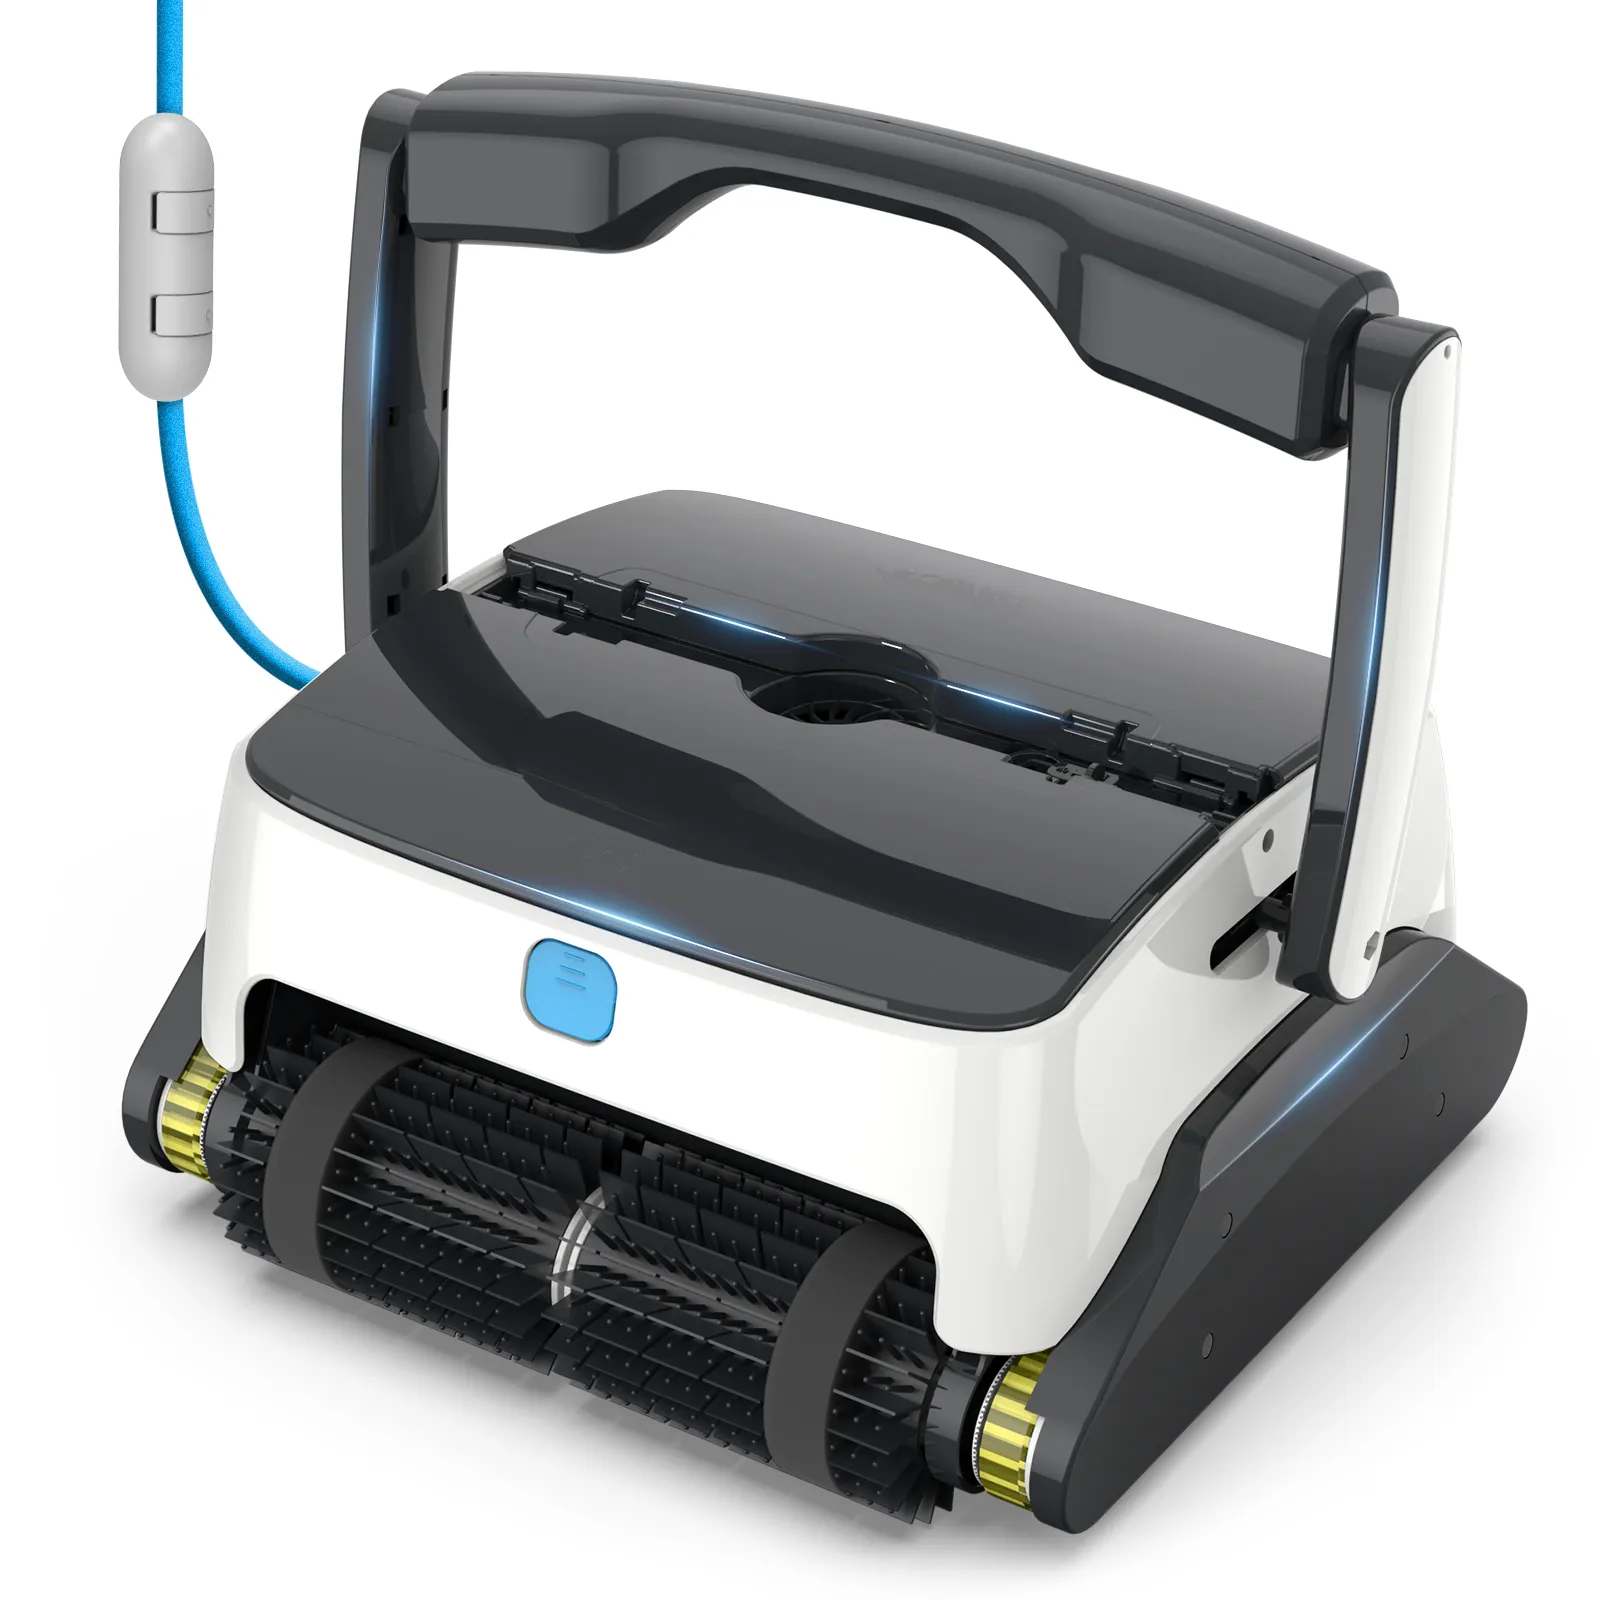 Robot Pool Cleaner Scrubber For Swimming Pools 15m Cable Automatisk pool dammsugat tvättvägg och golv